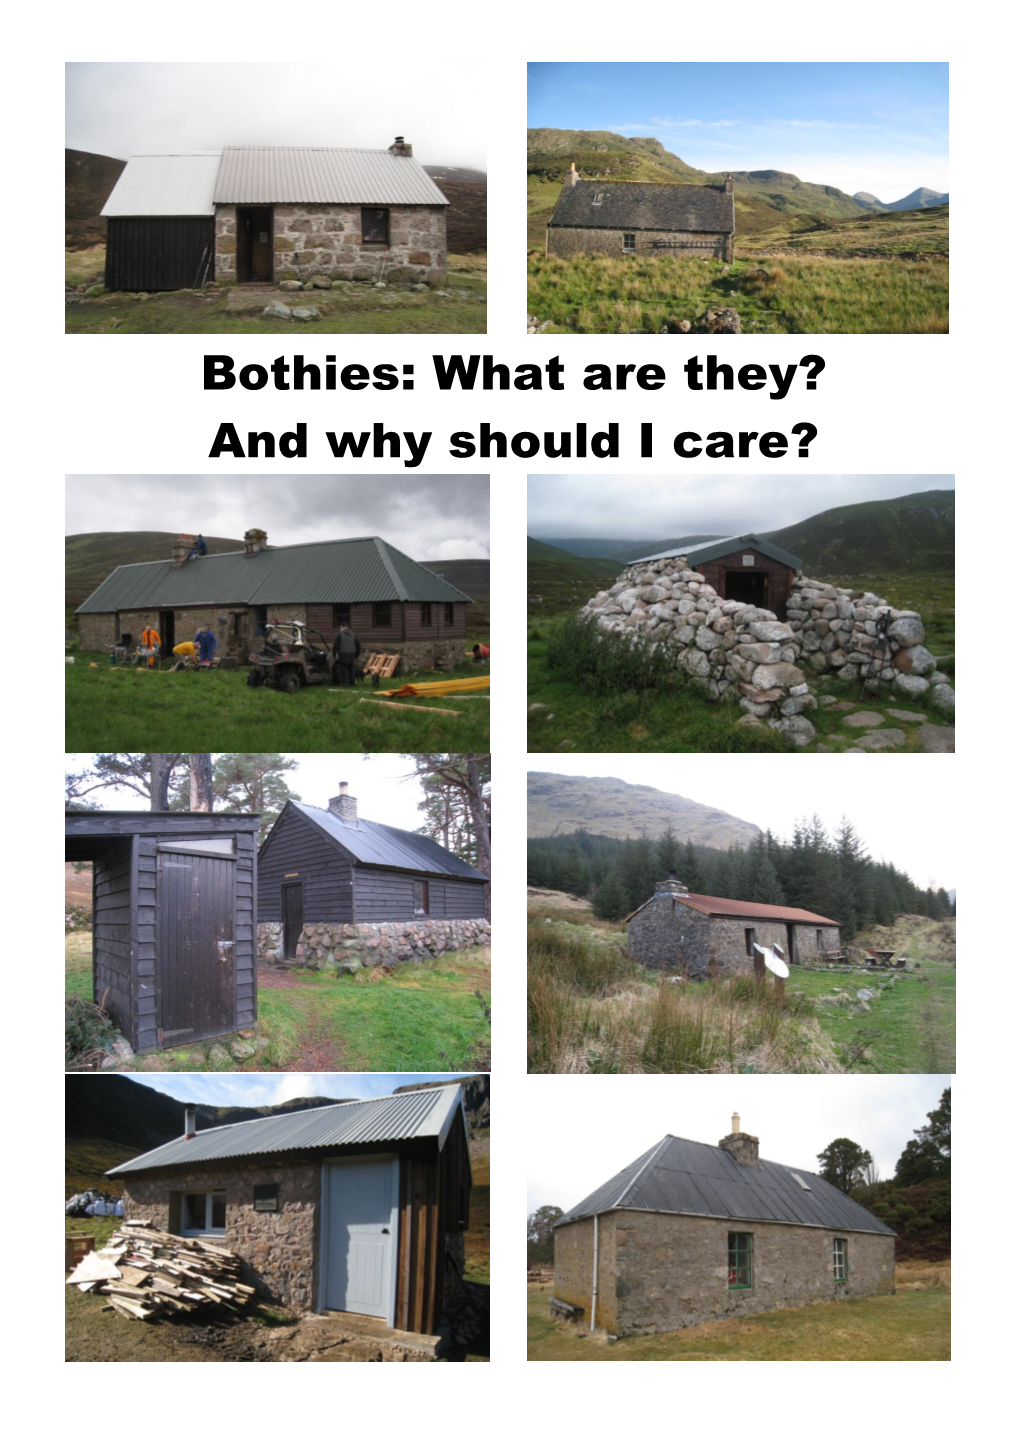 Bothies: What Are They?